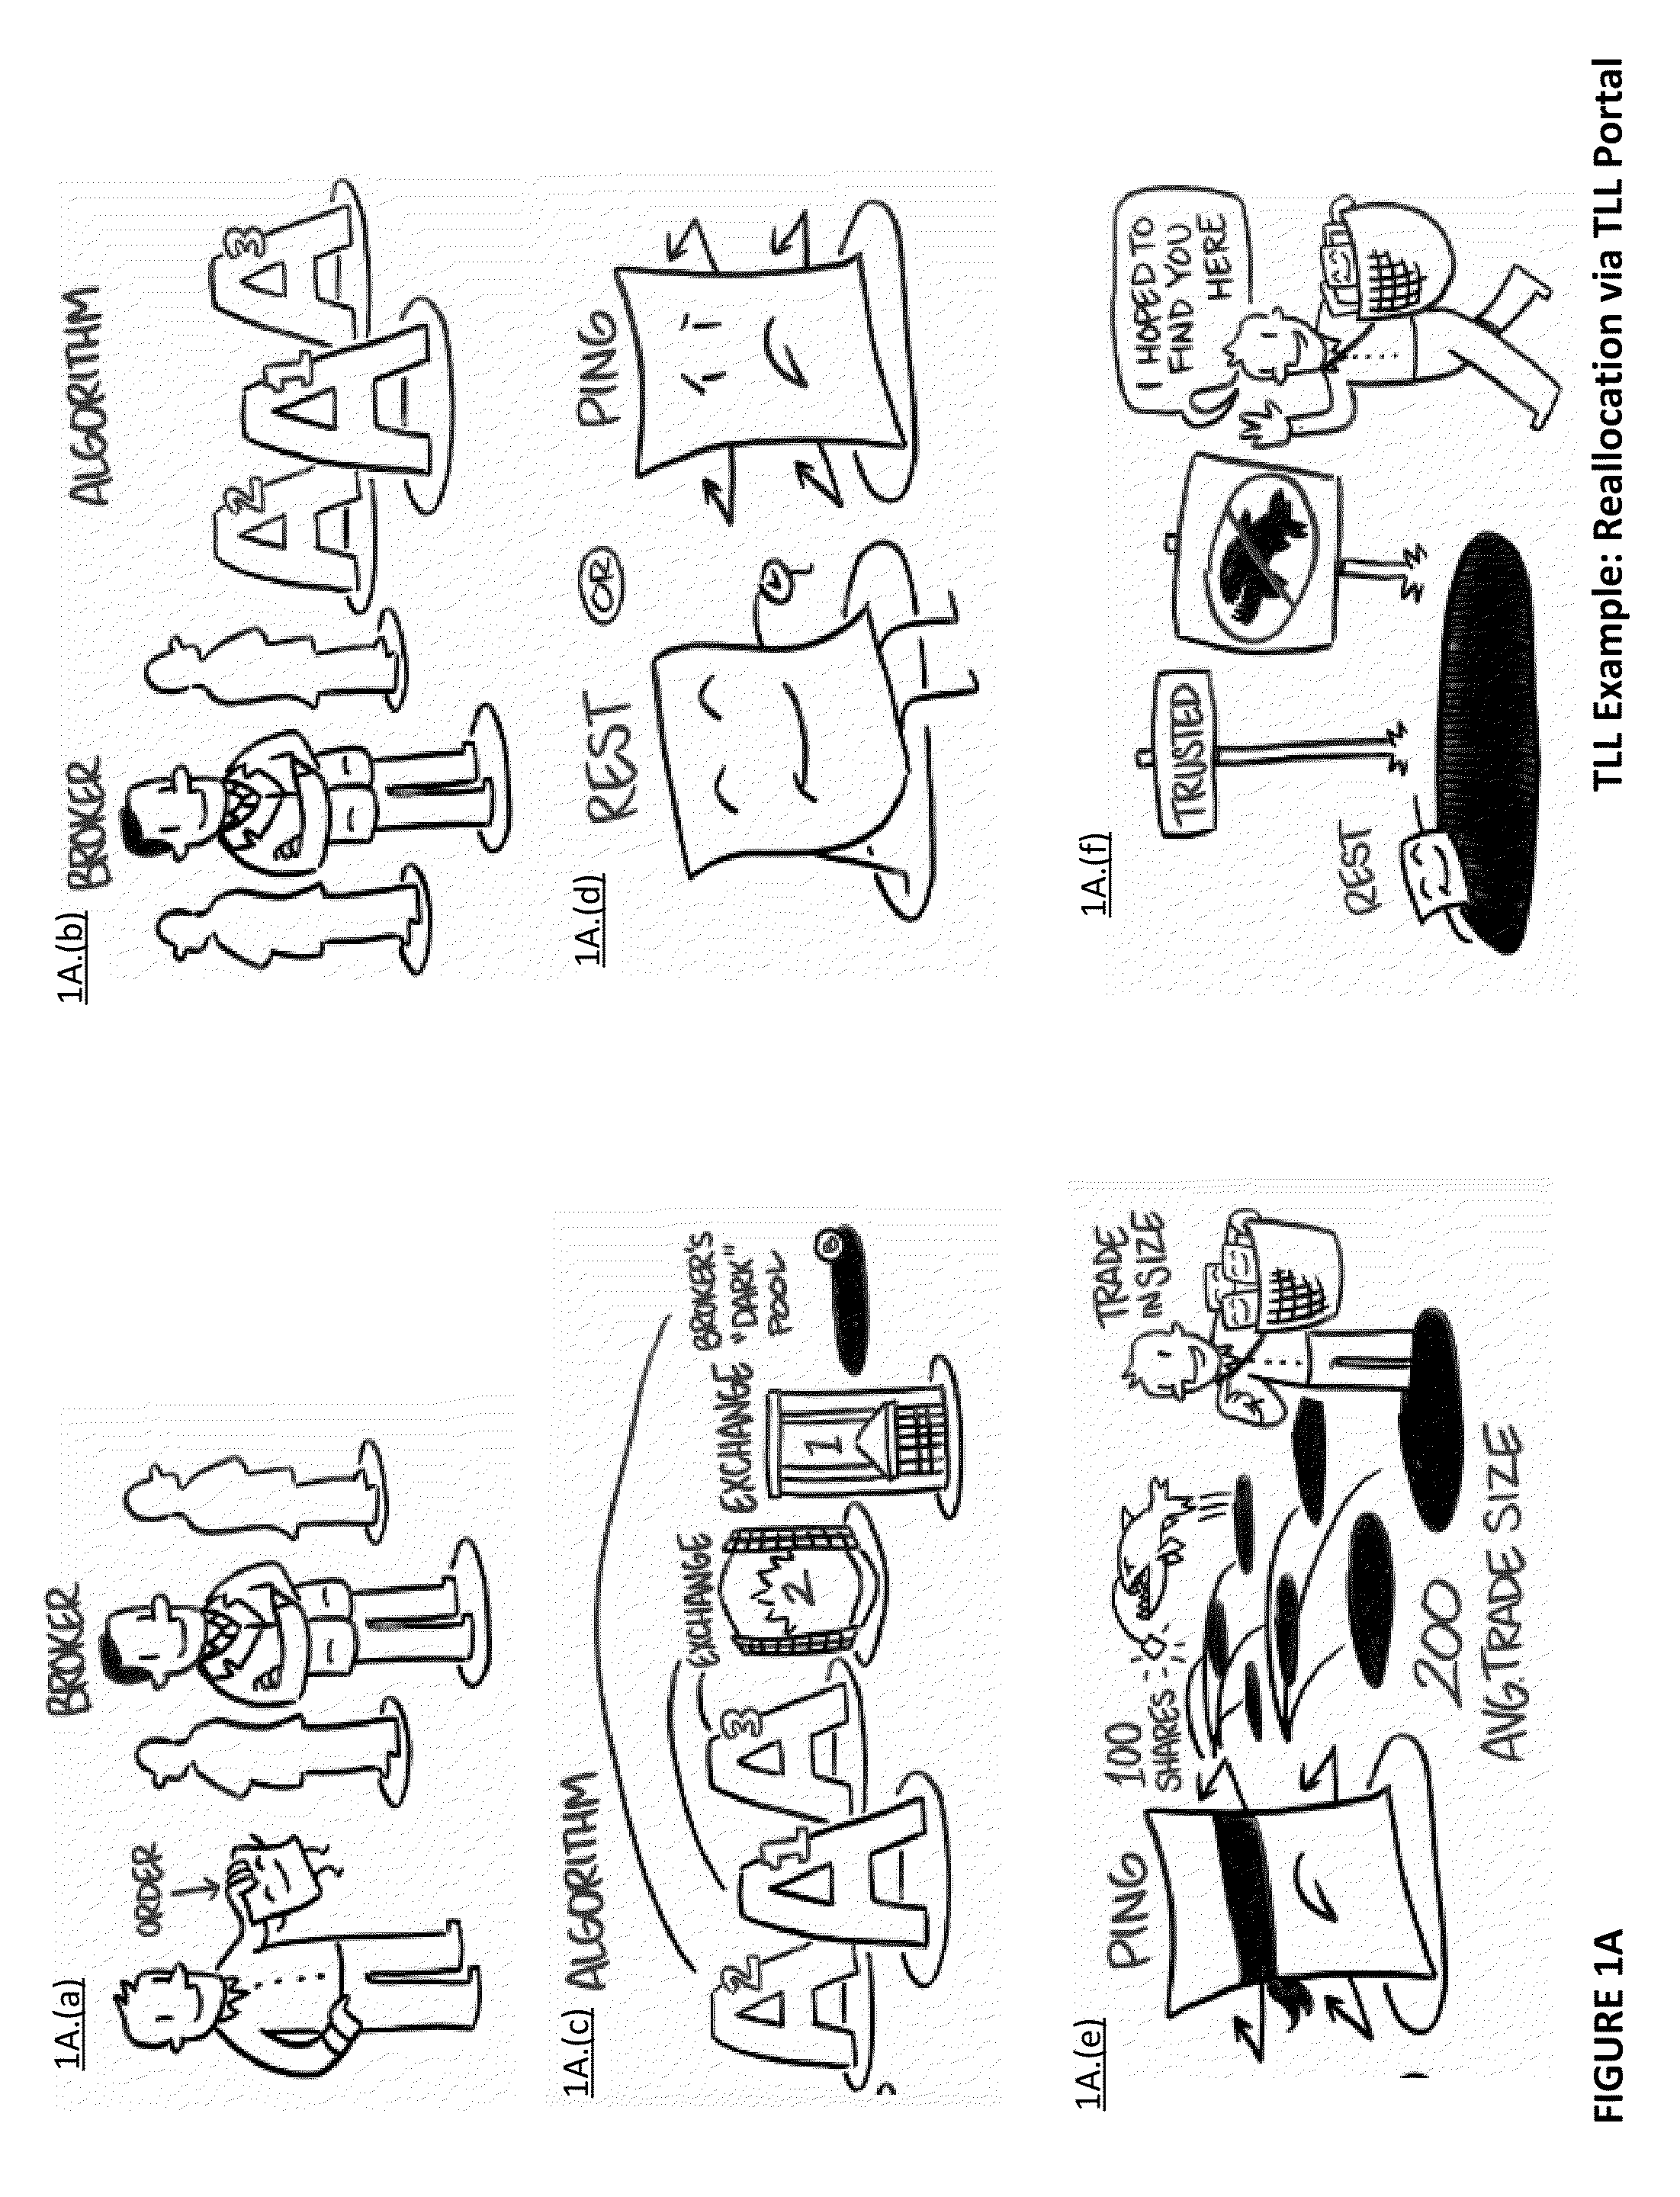 System and method for a semi-lit market